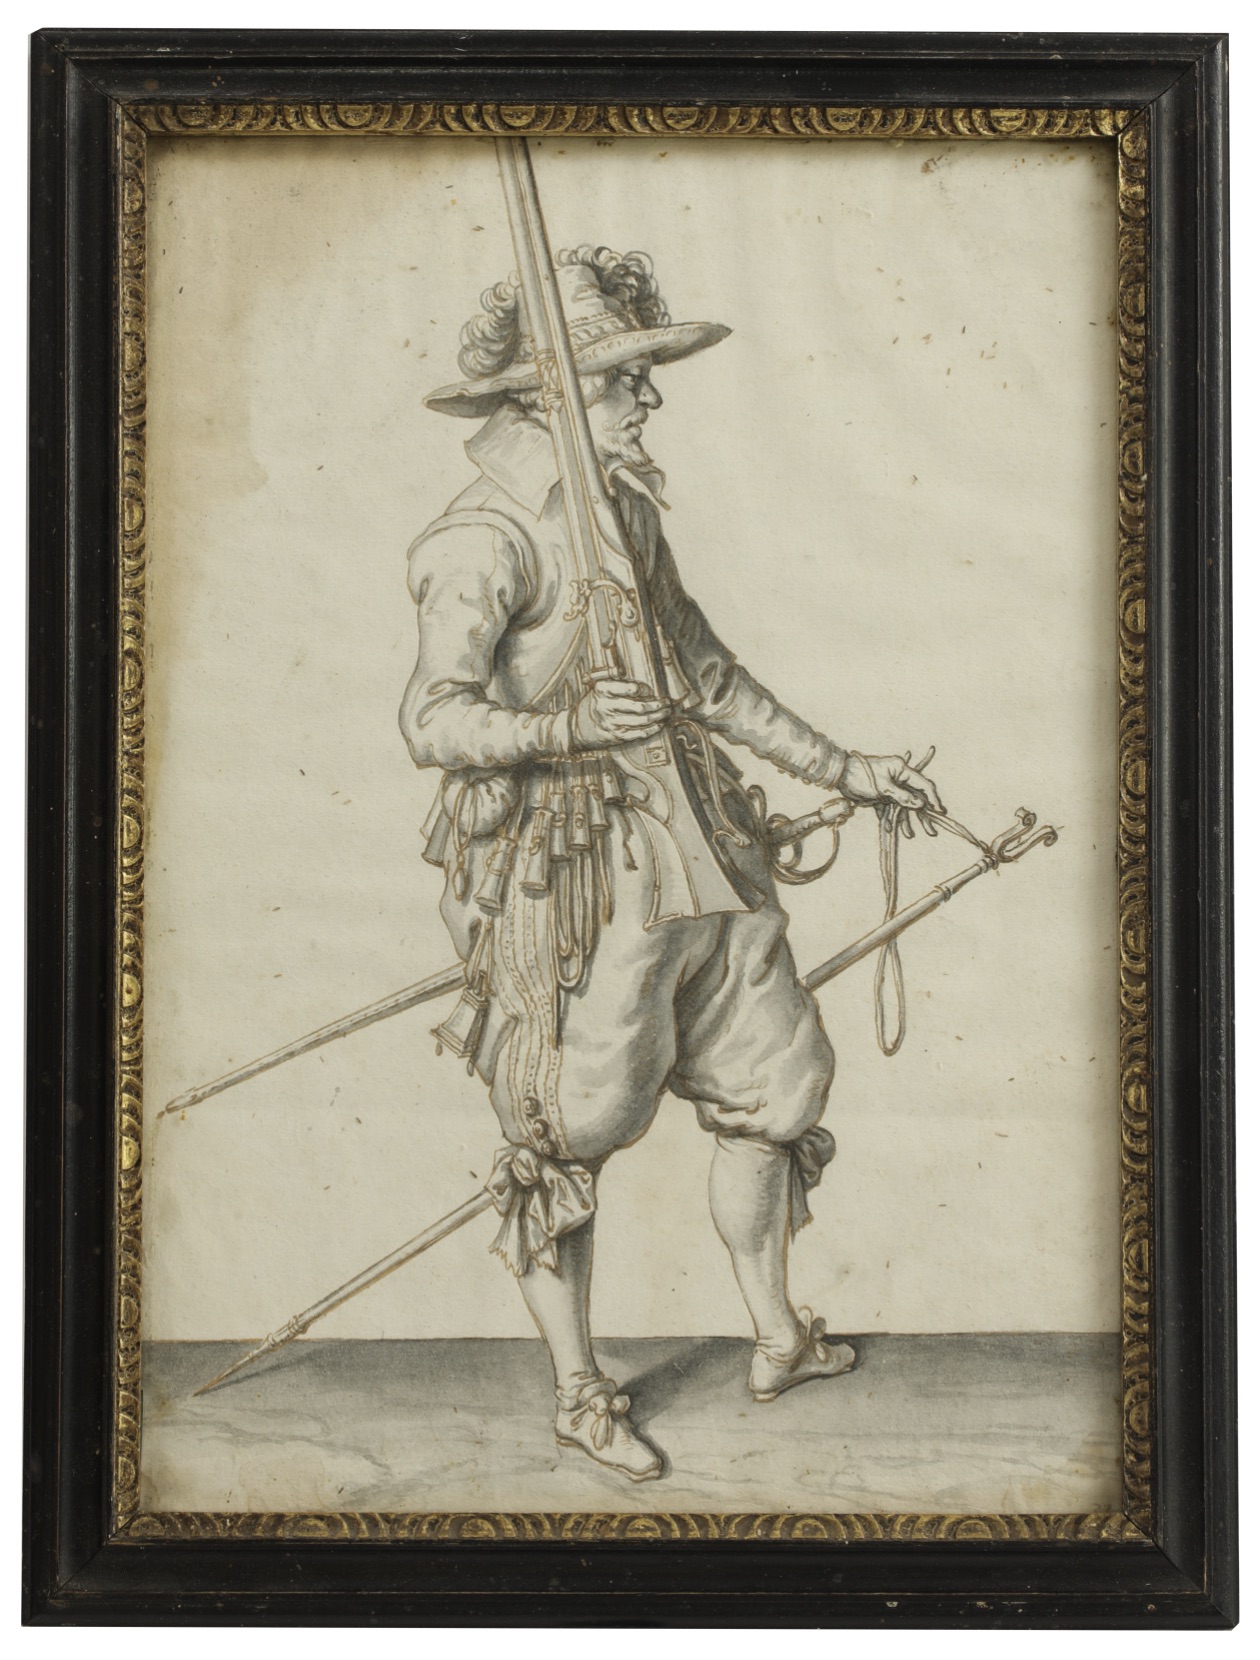 Attributed to Jacob de Gheyn the Younger 